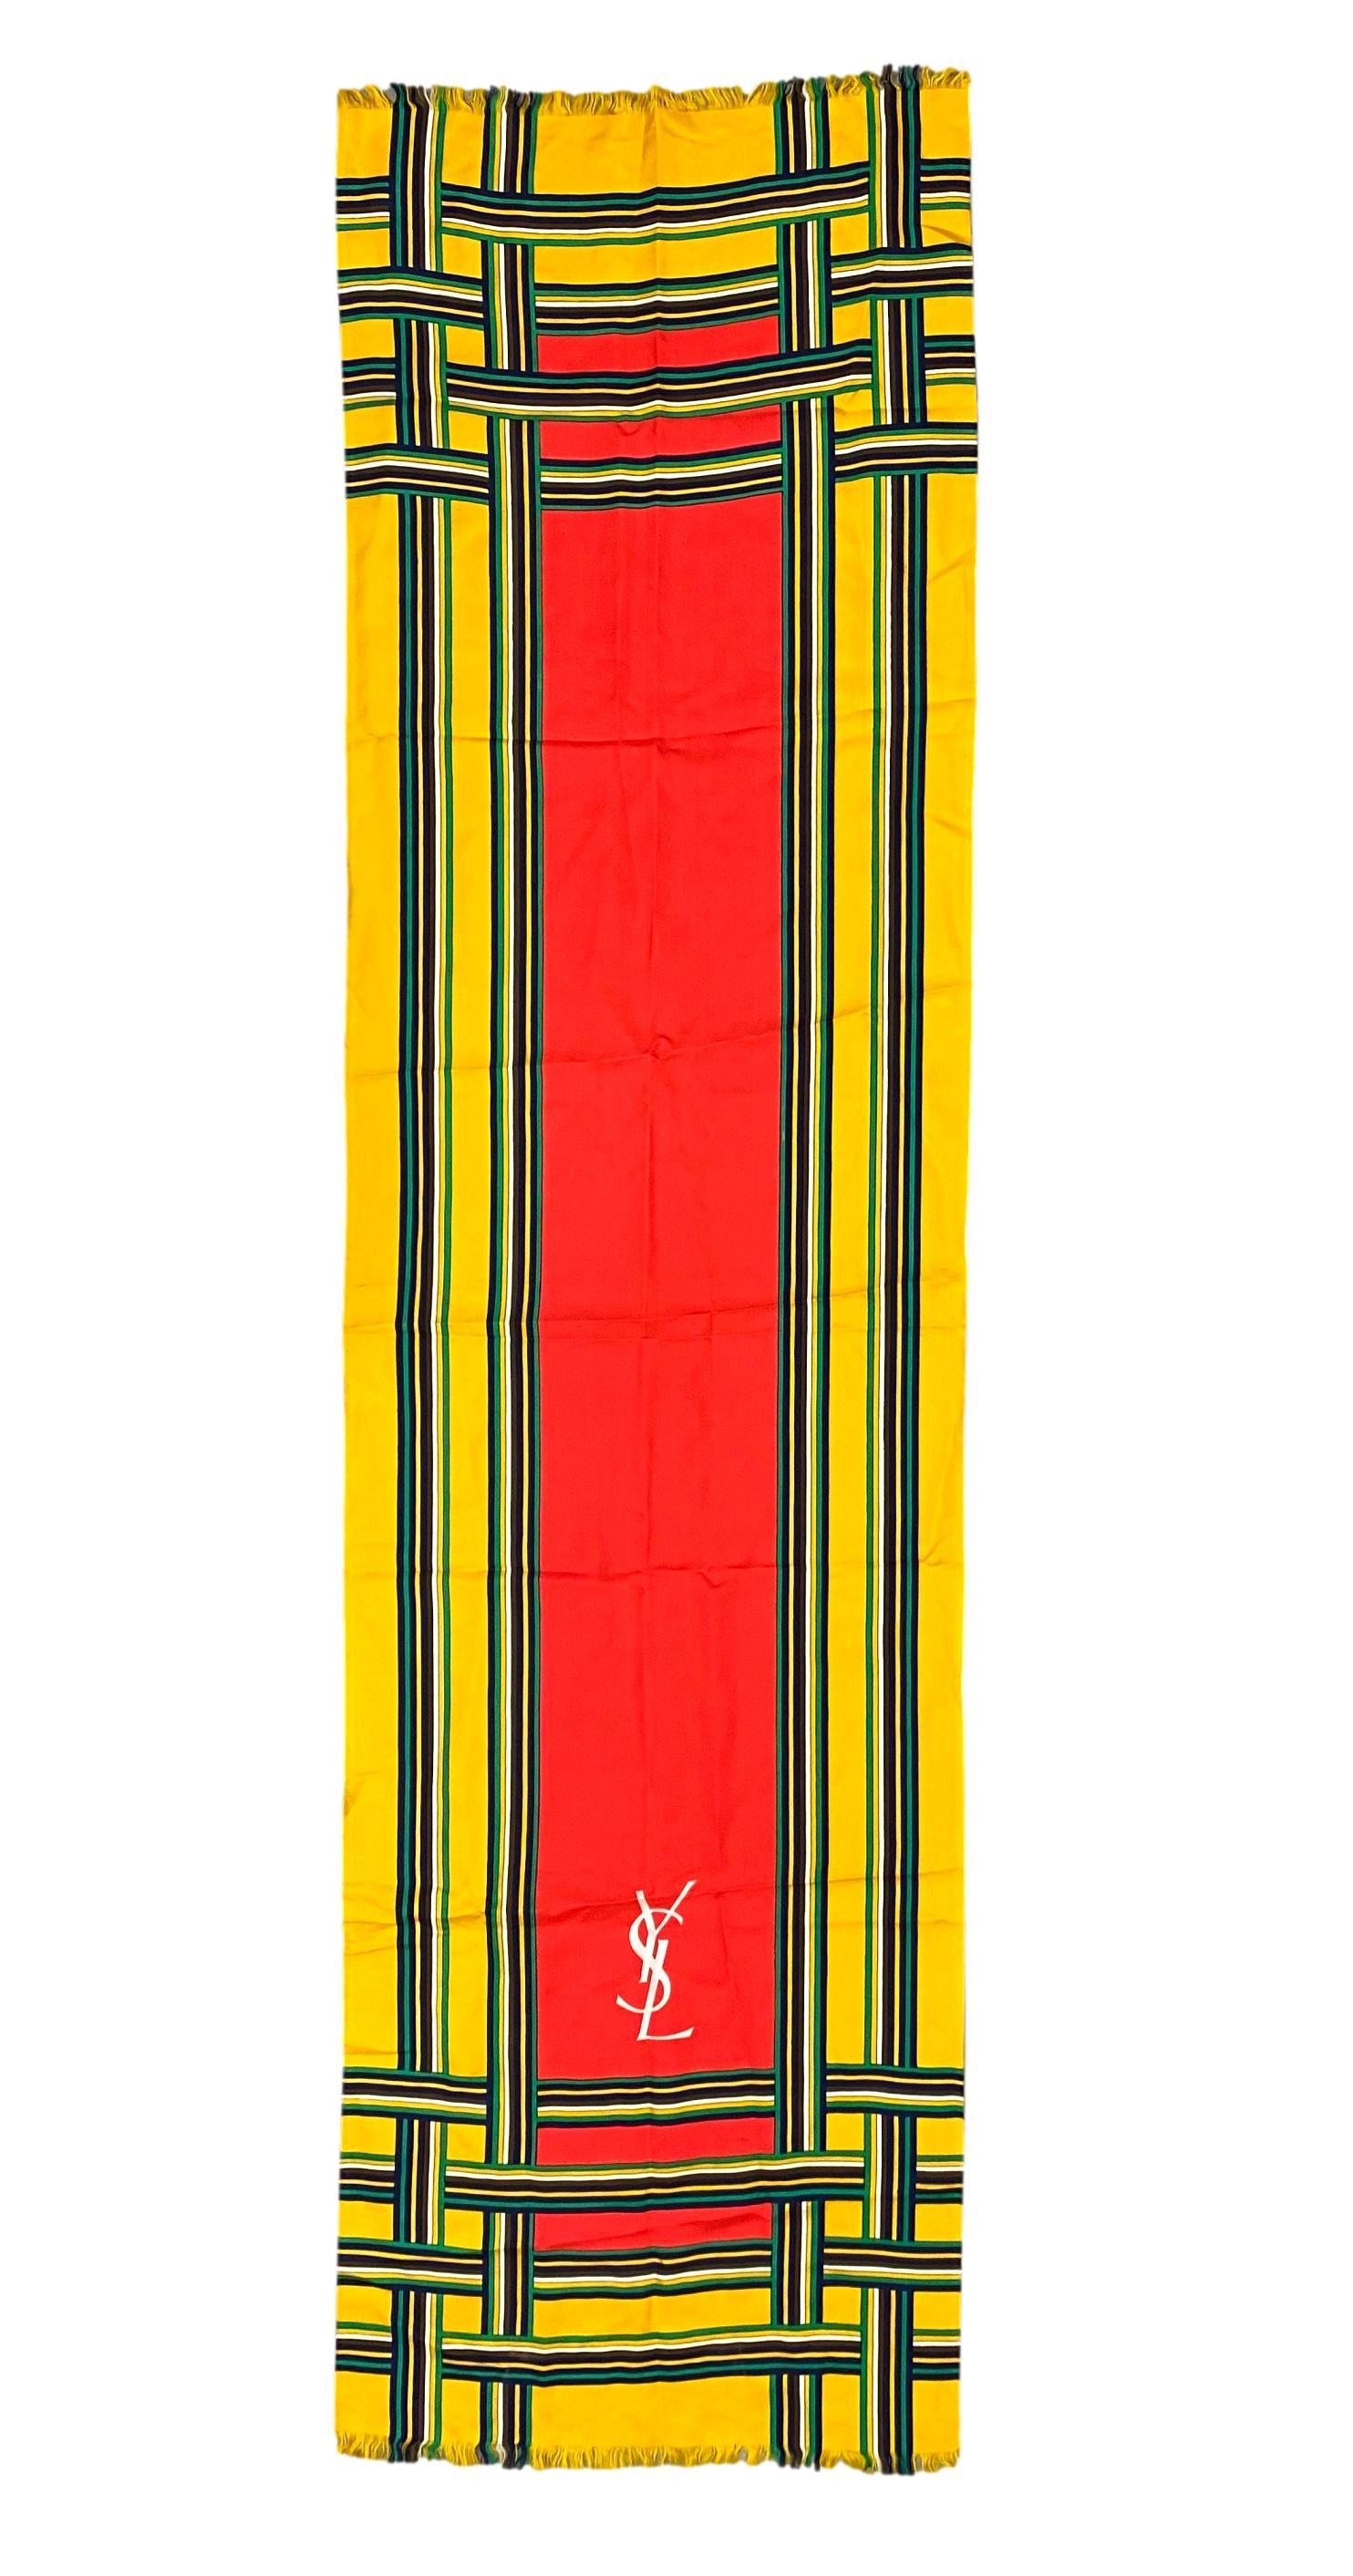 Yves Saint Laurent Vintage Silk Plaid Multi-Color Long Wrap Scarf, Circa 1970 - 1975. This beautiful and classic cross hatched patterned scarf by Yves Saint Laurent comes in a beautiful bright yellow and red coloration. In the early 1960's, Yves